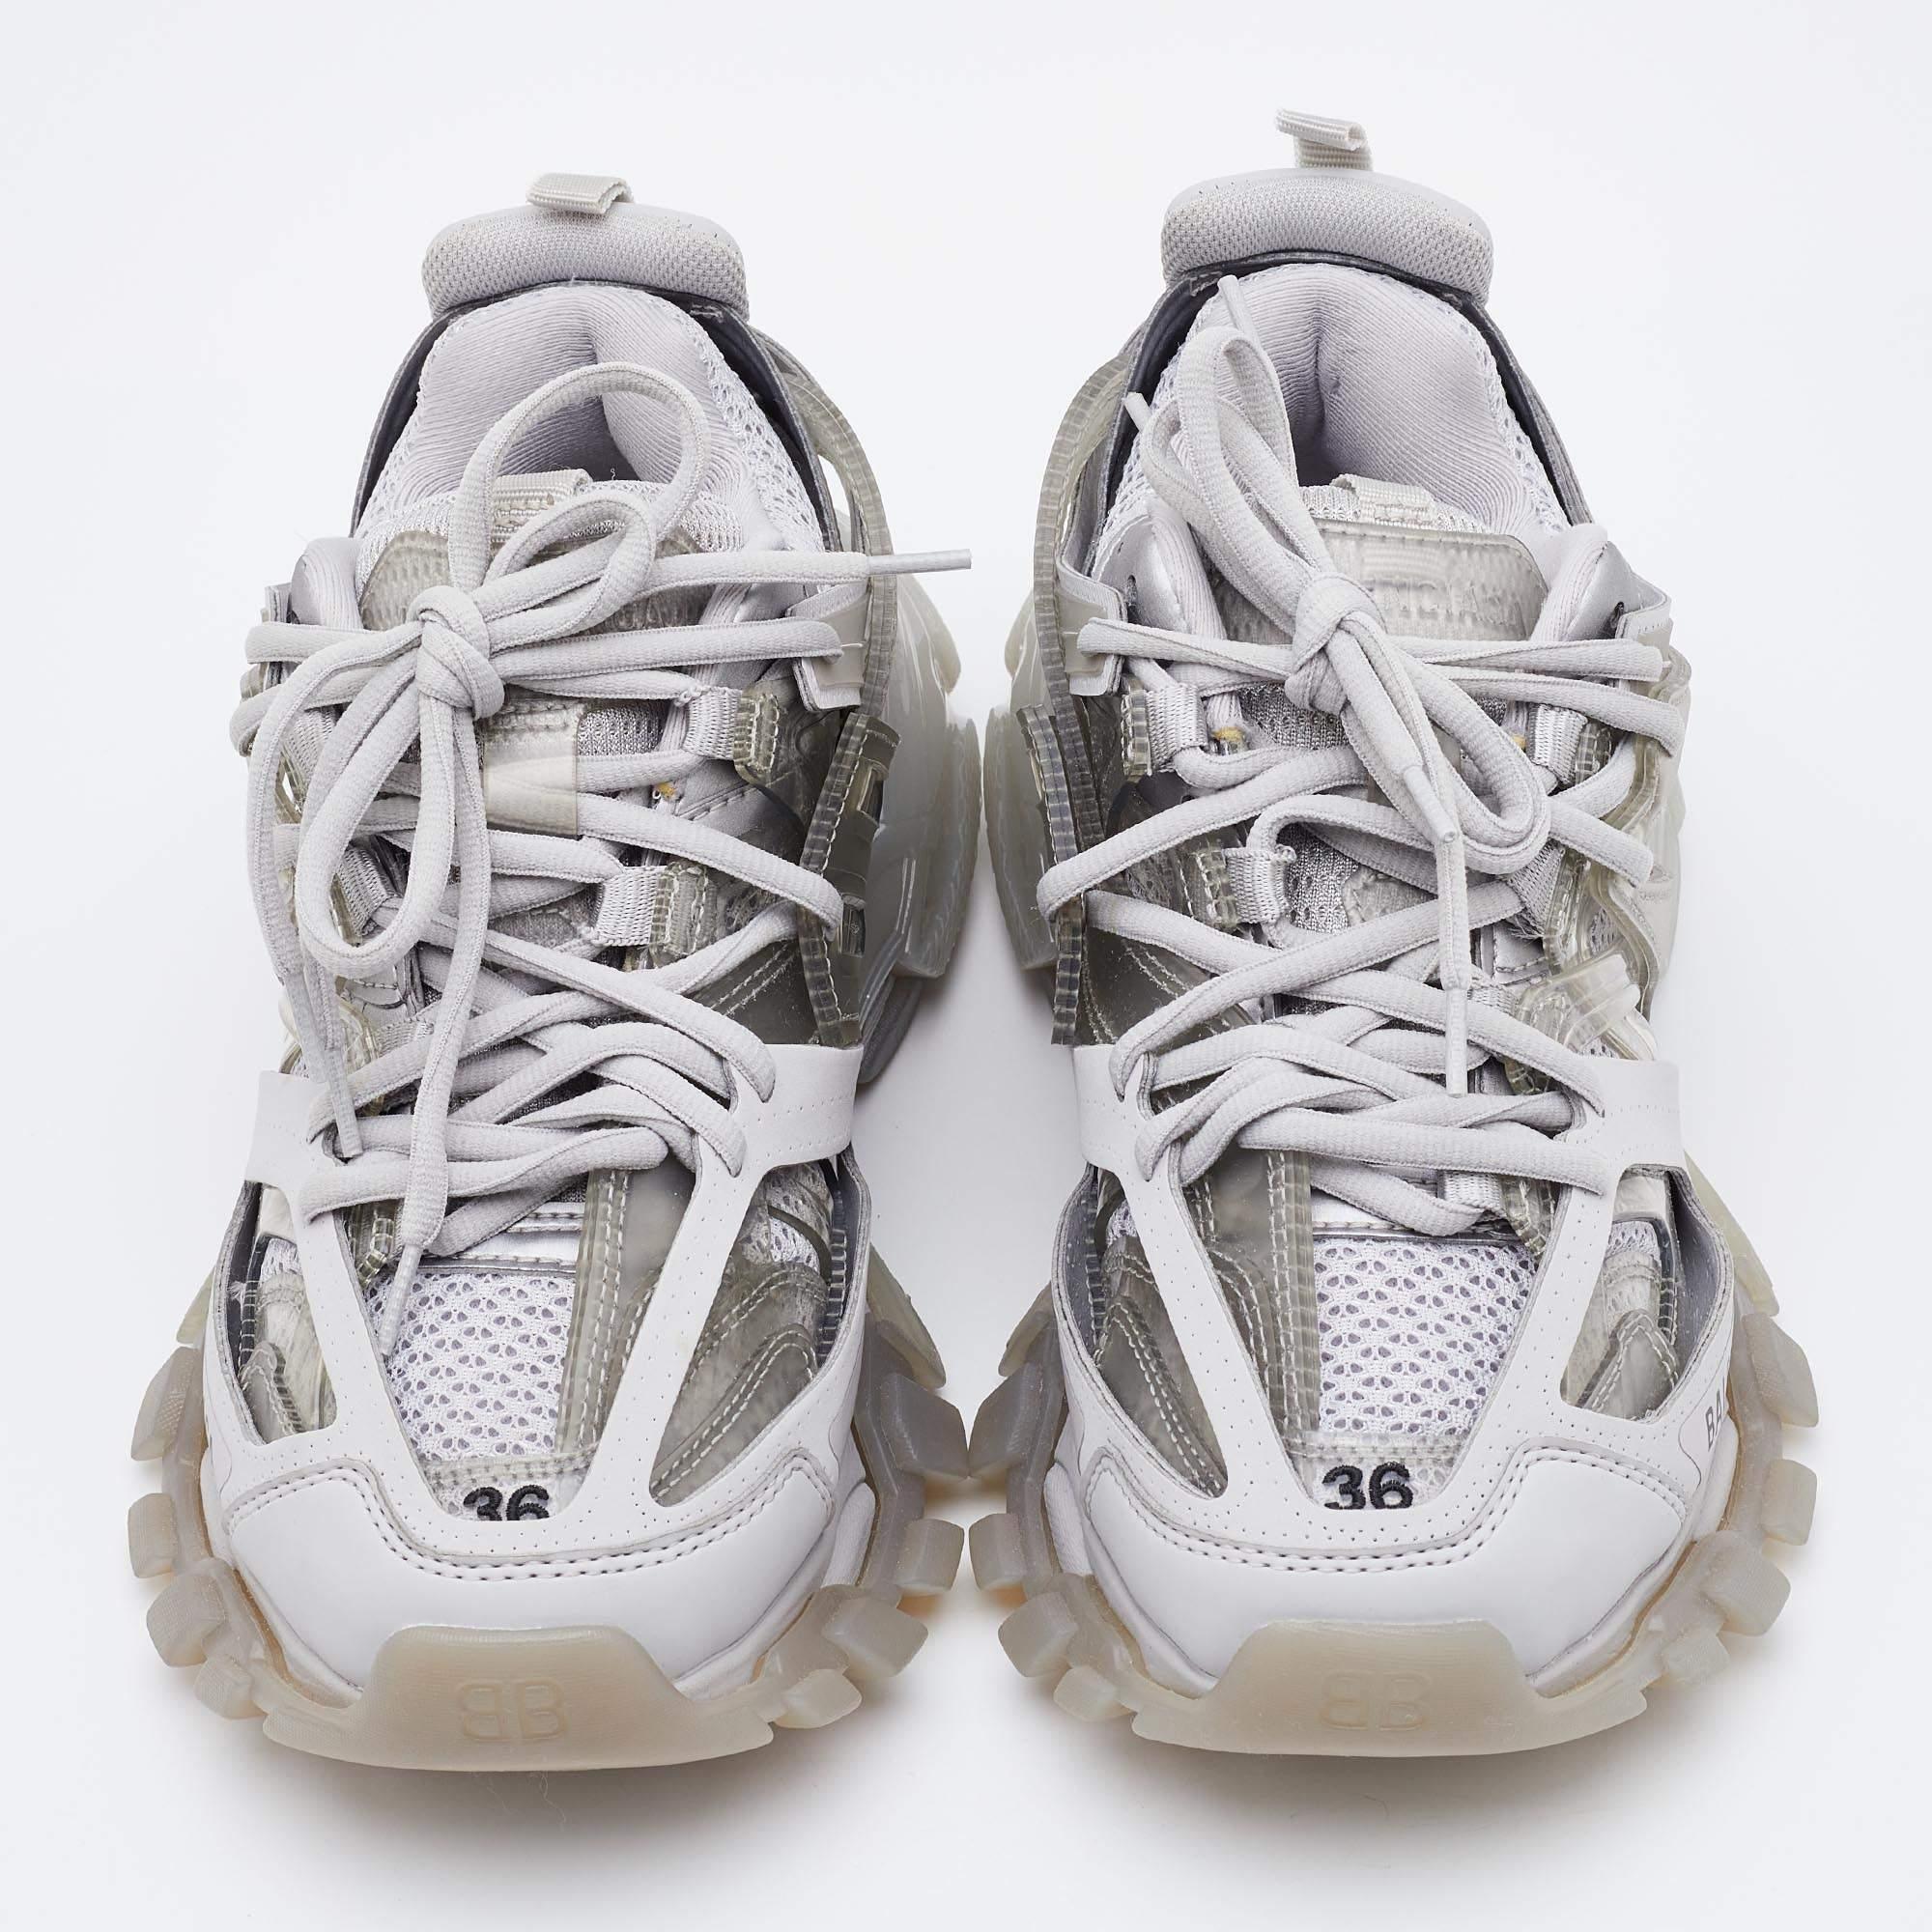 Featuring a mix of materials and double laces knotted on the uppers, these Balenciaga Track 2 sneakers are a dream to walk in. Label detailing and the size on the toes add the finishing touch.

Includes: Extra Laces
